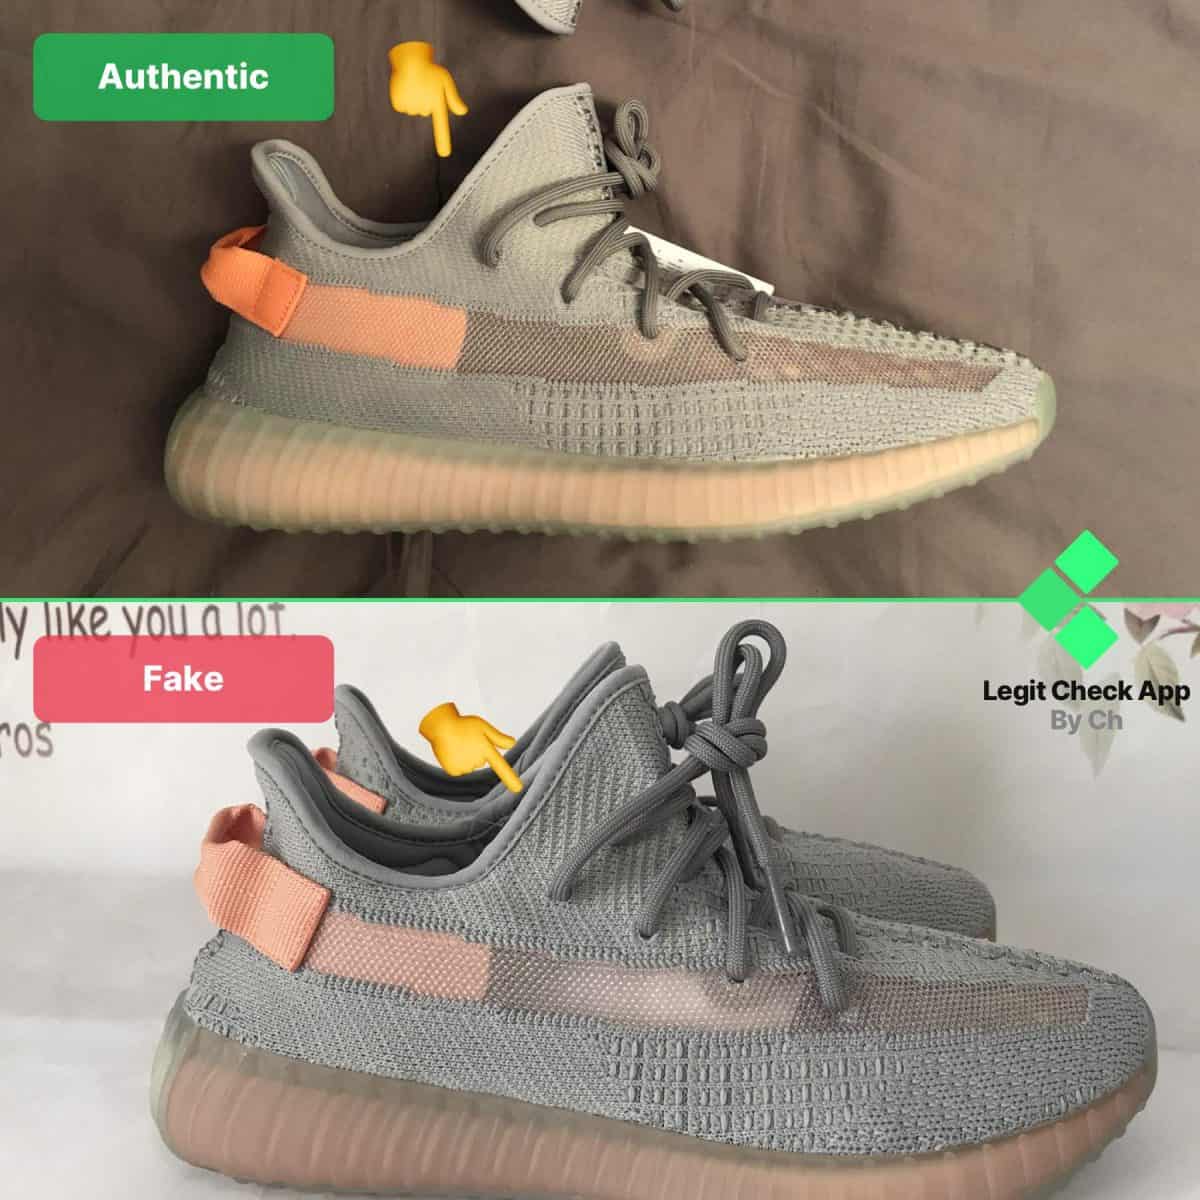 yeezy true form review